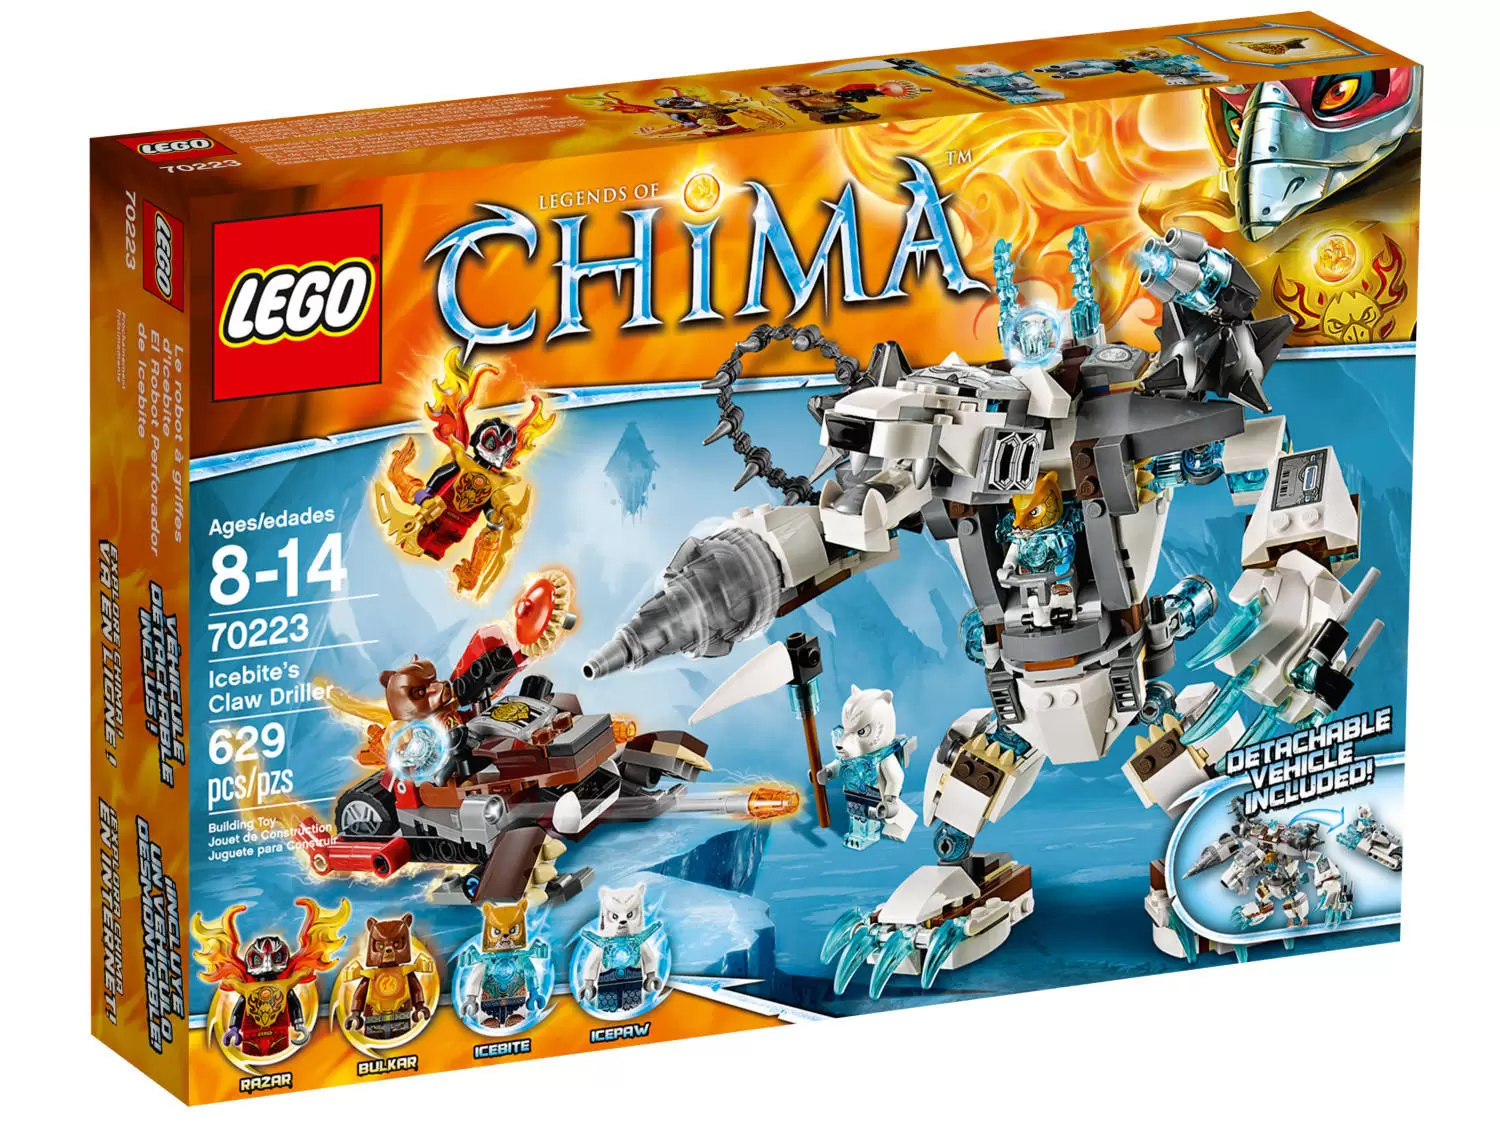 LEGO Legends of Chima - Icebite\'s Claw Driller